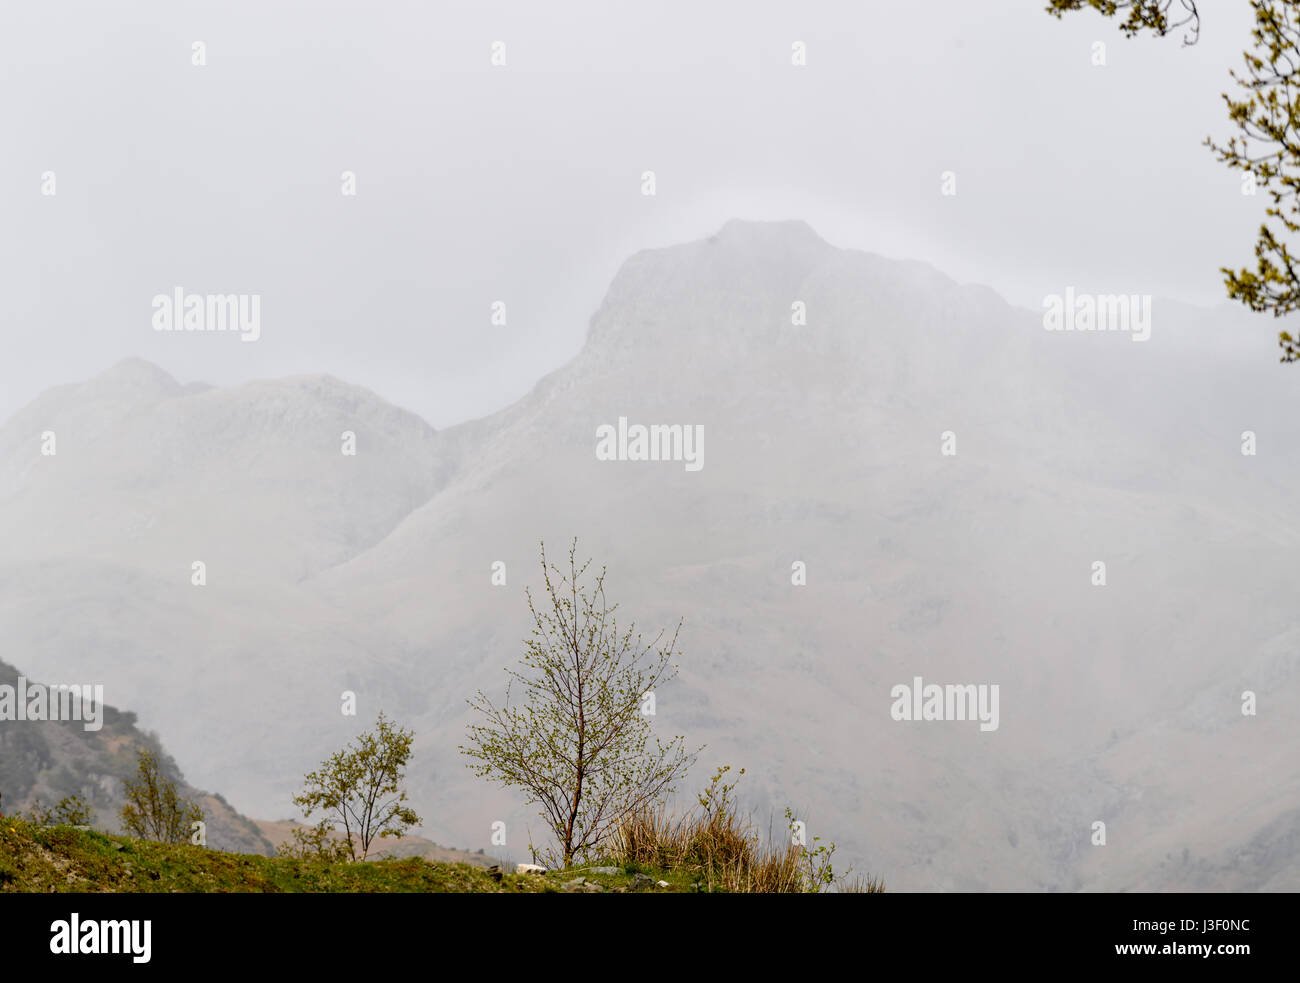 Hazy contours of Langdale peaks on a misty day in springtime, seen from  Elterwater, lake district, Cumbria, England. Stock Photo